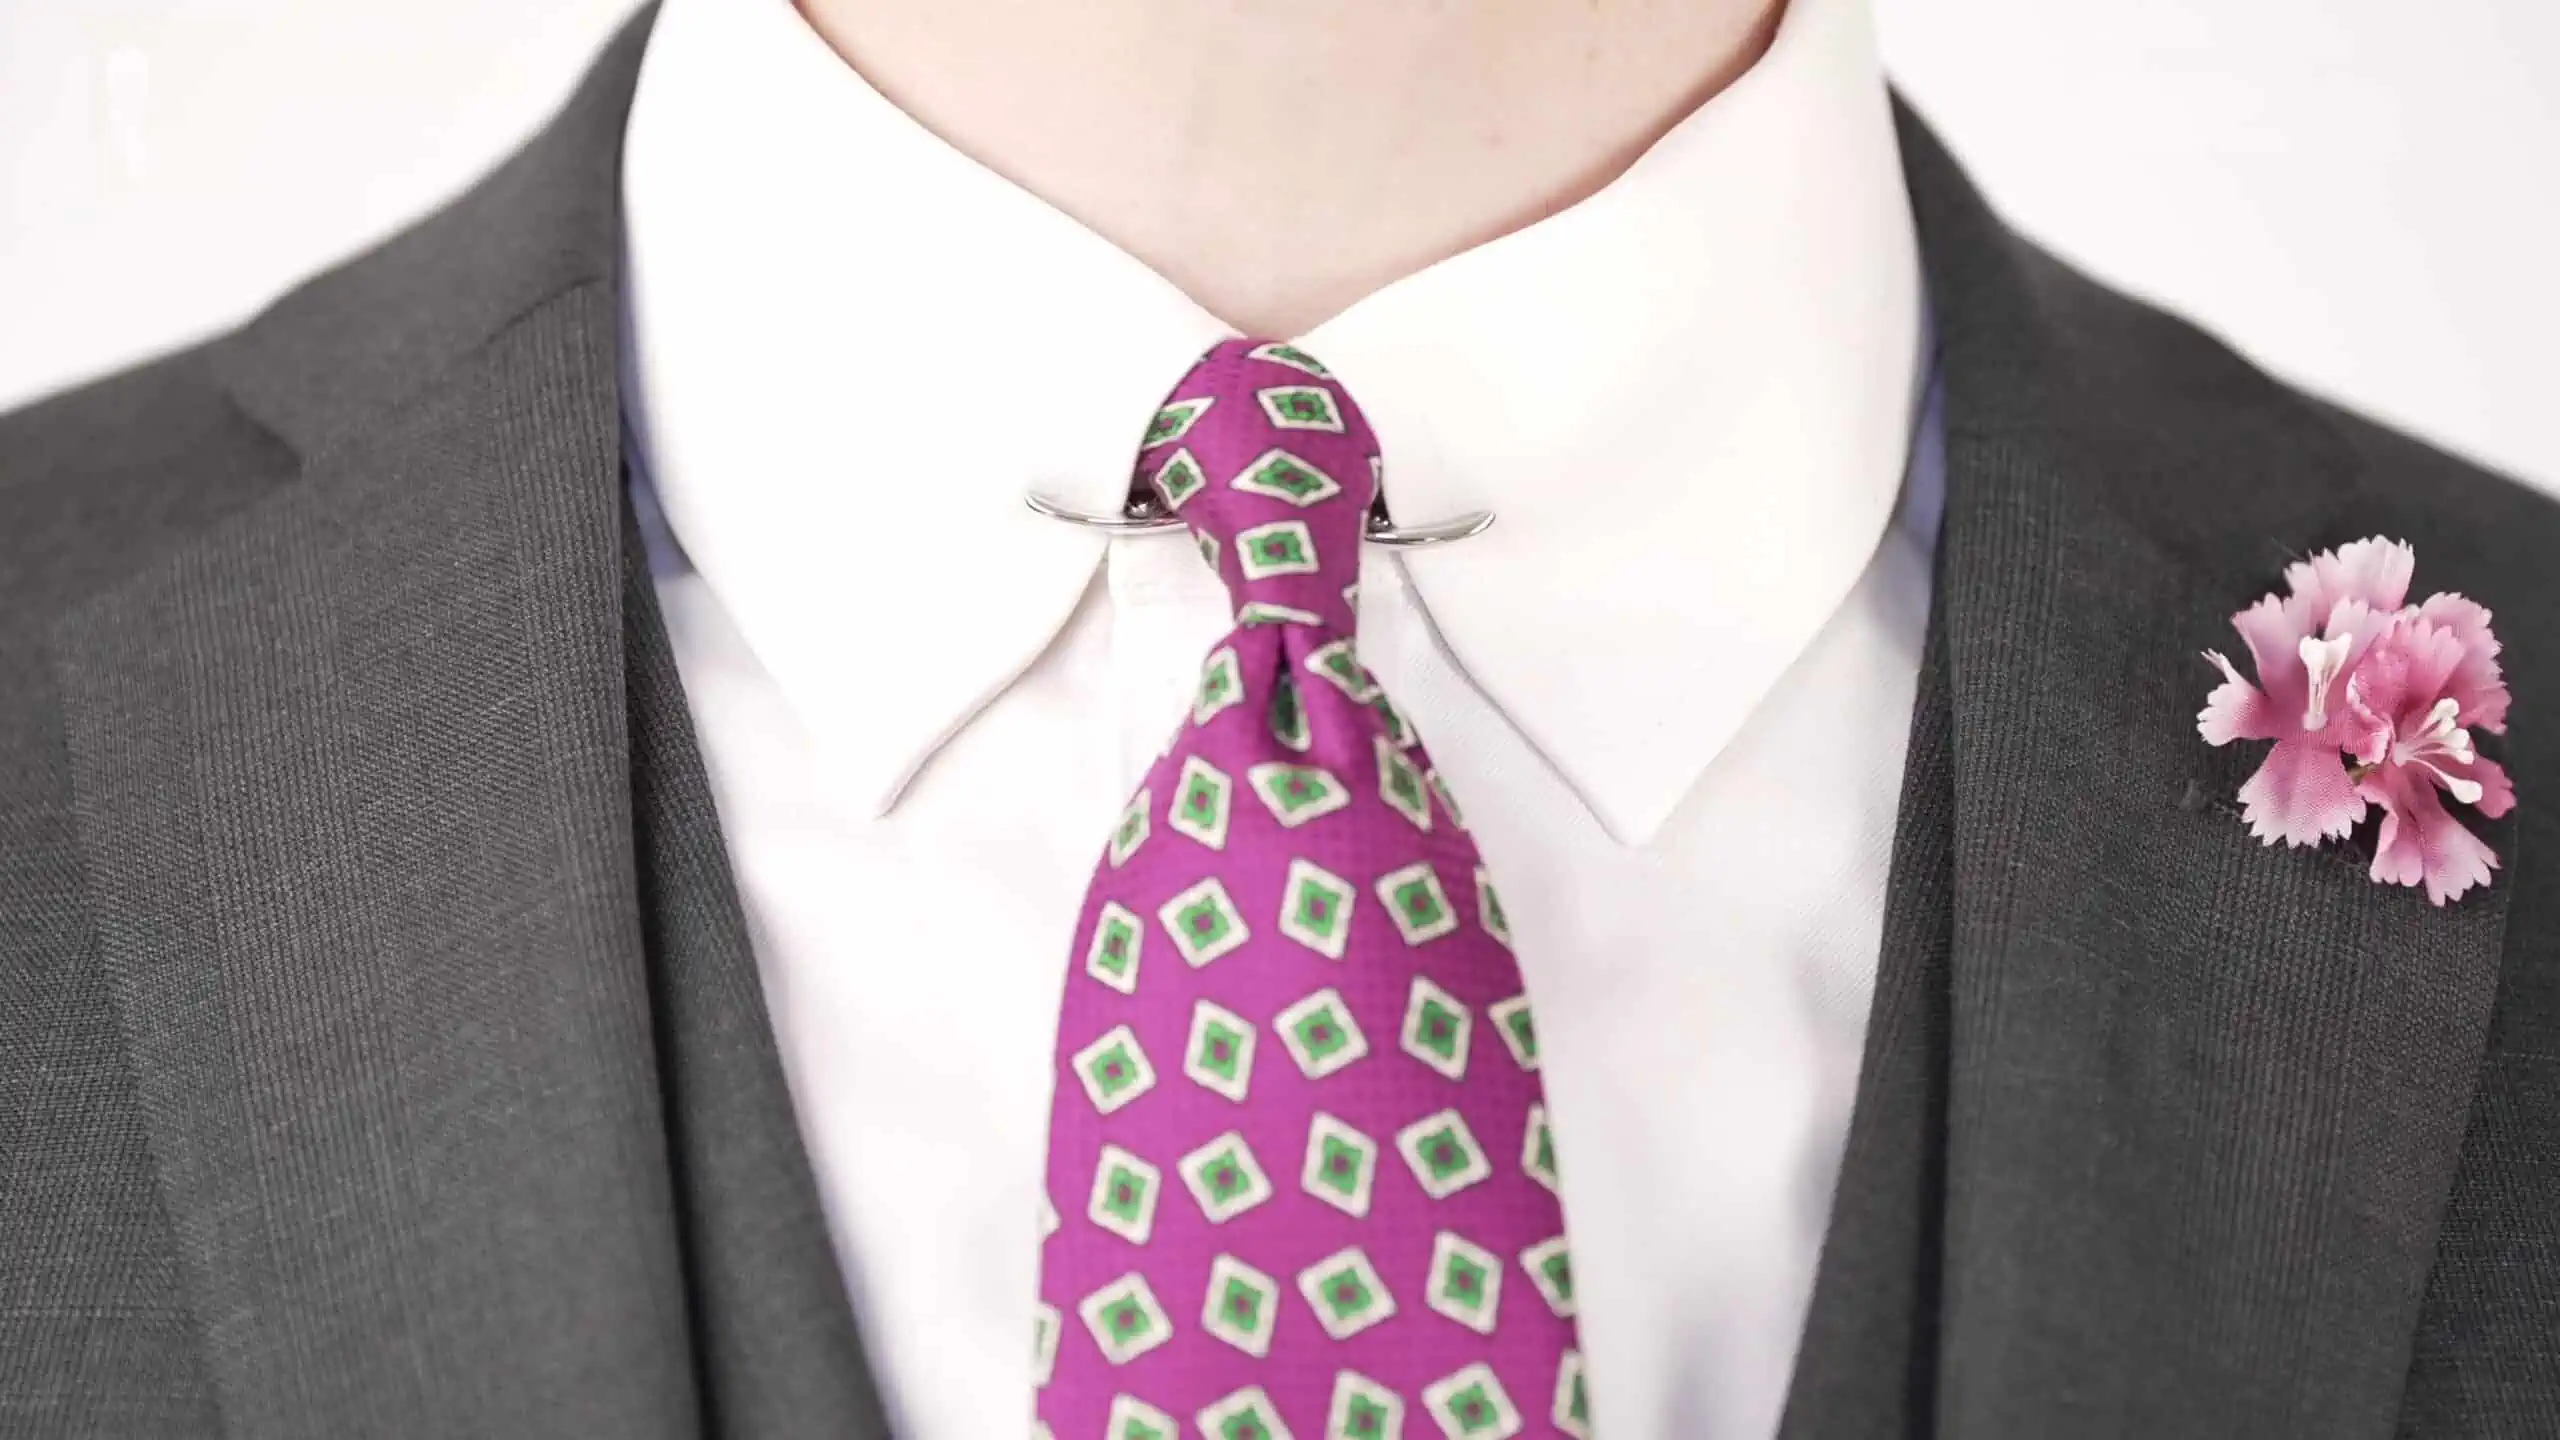 Color is an important element when choosing a tie.